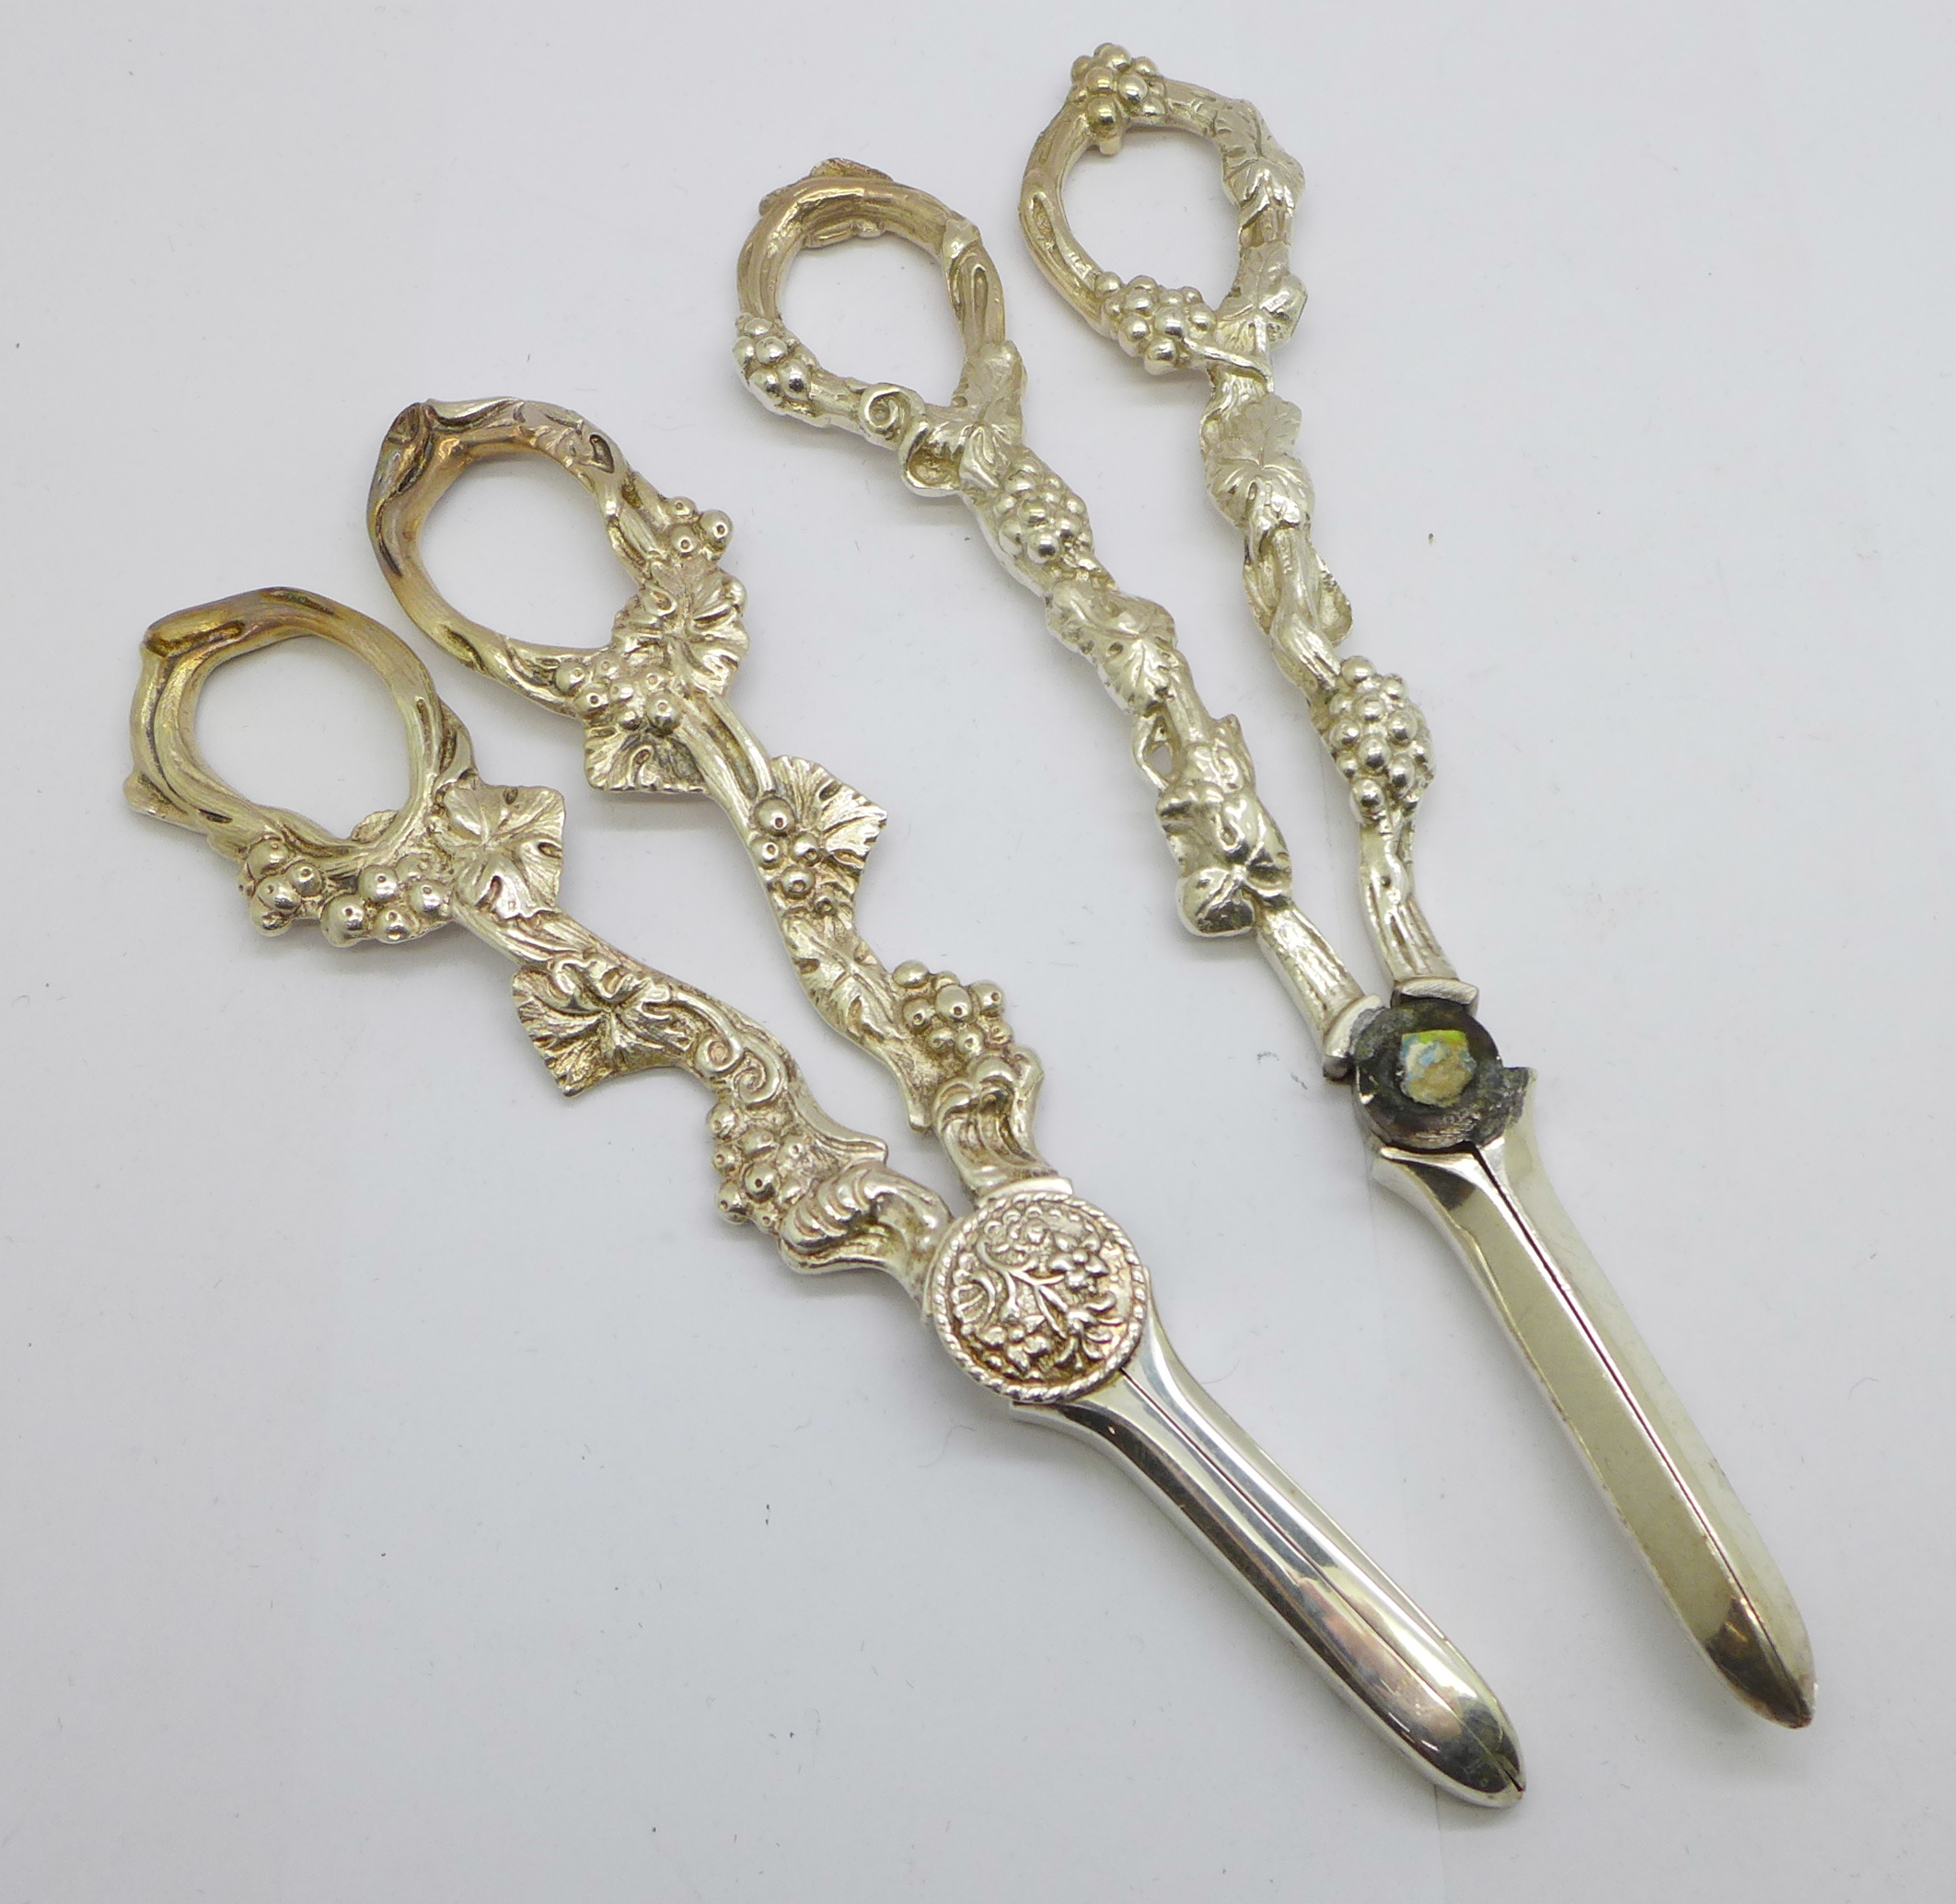 Two pairs of grape scissors, one a/f